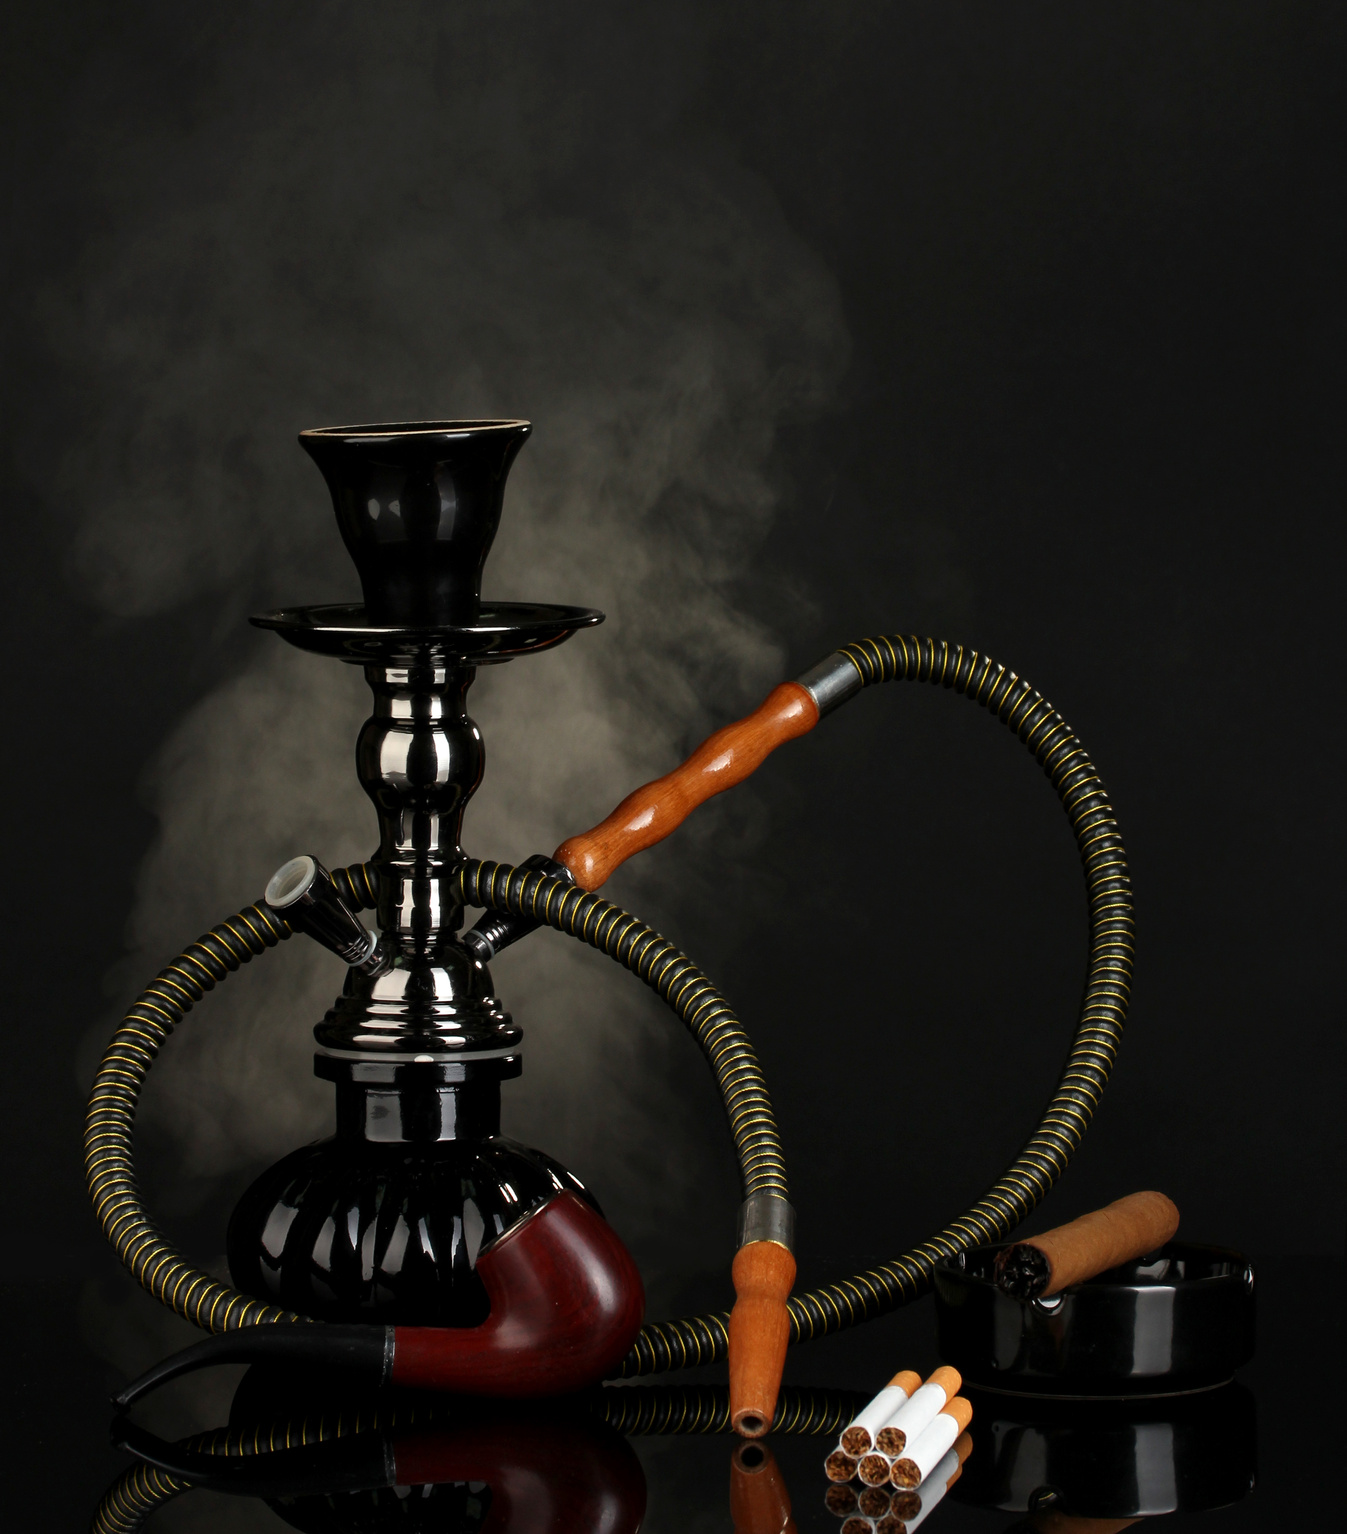 Smoking Tools - a Hookah, Cigar, Cigarette and Pipe on Black Background